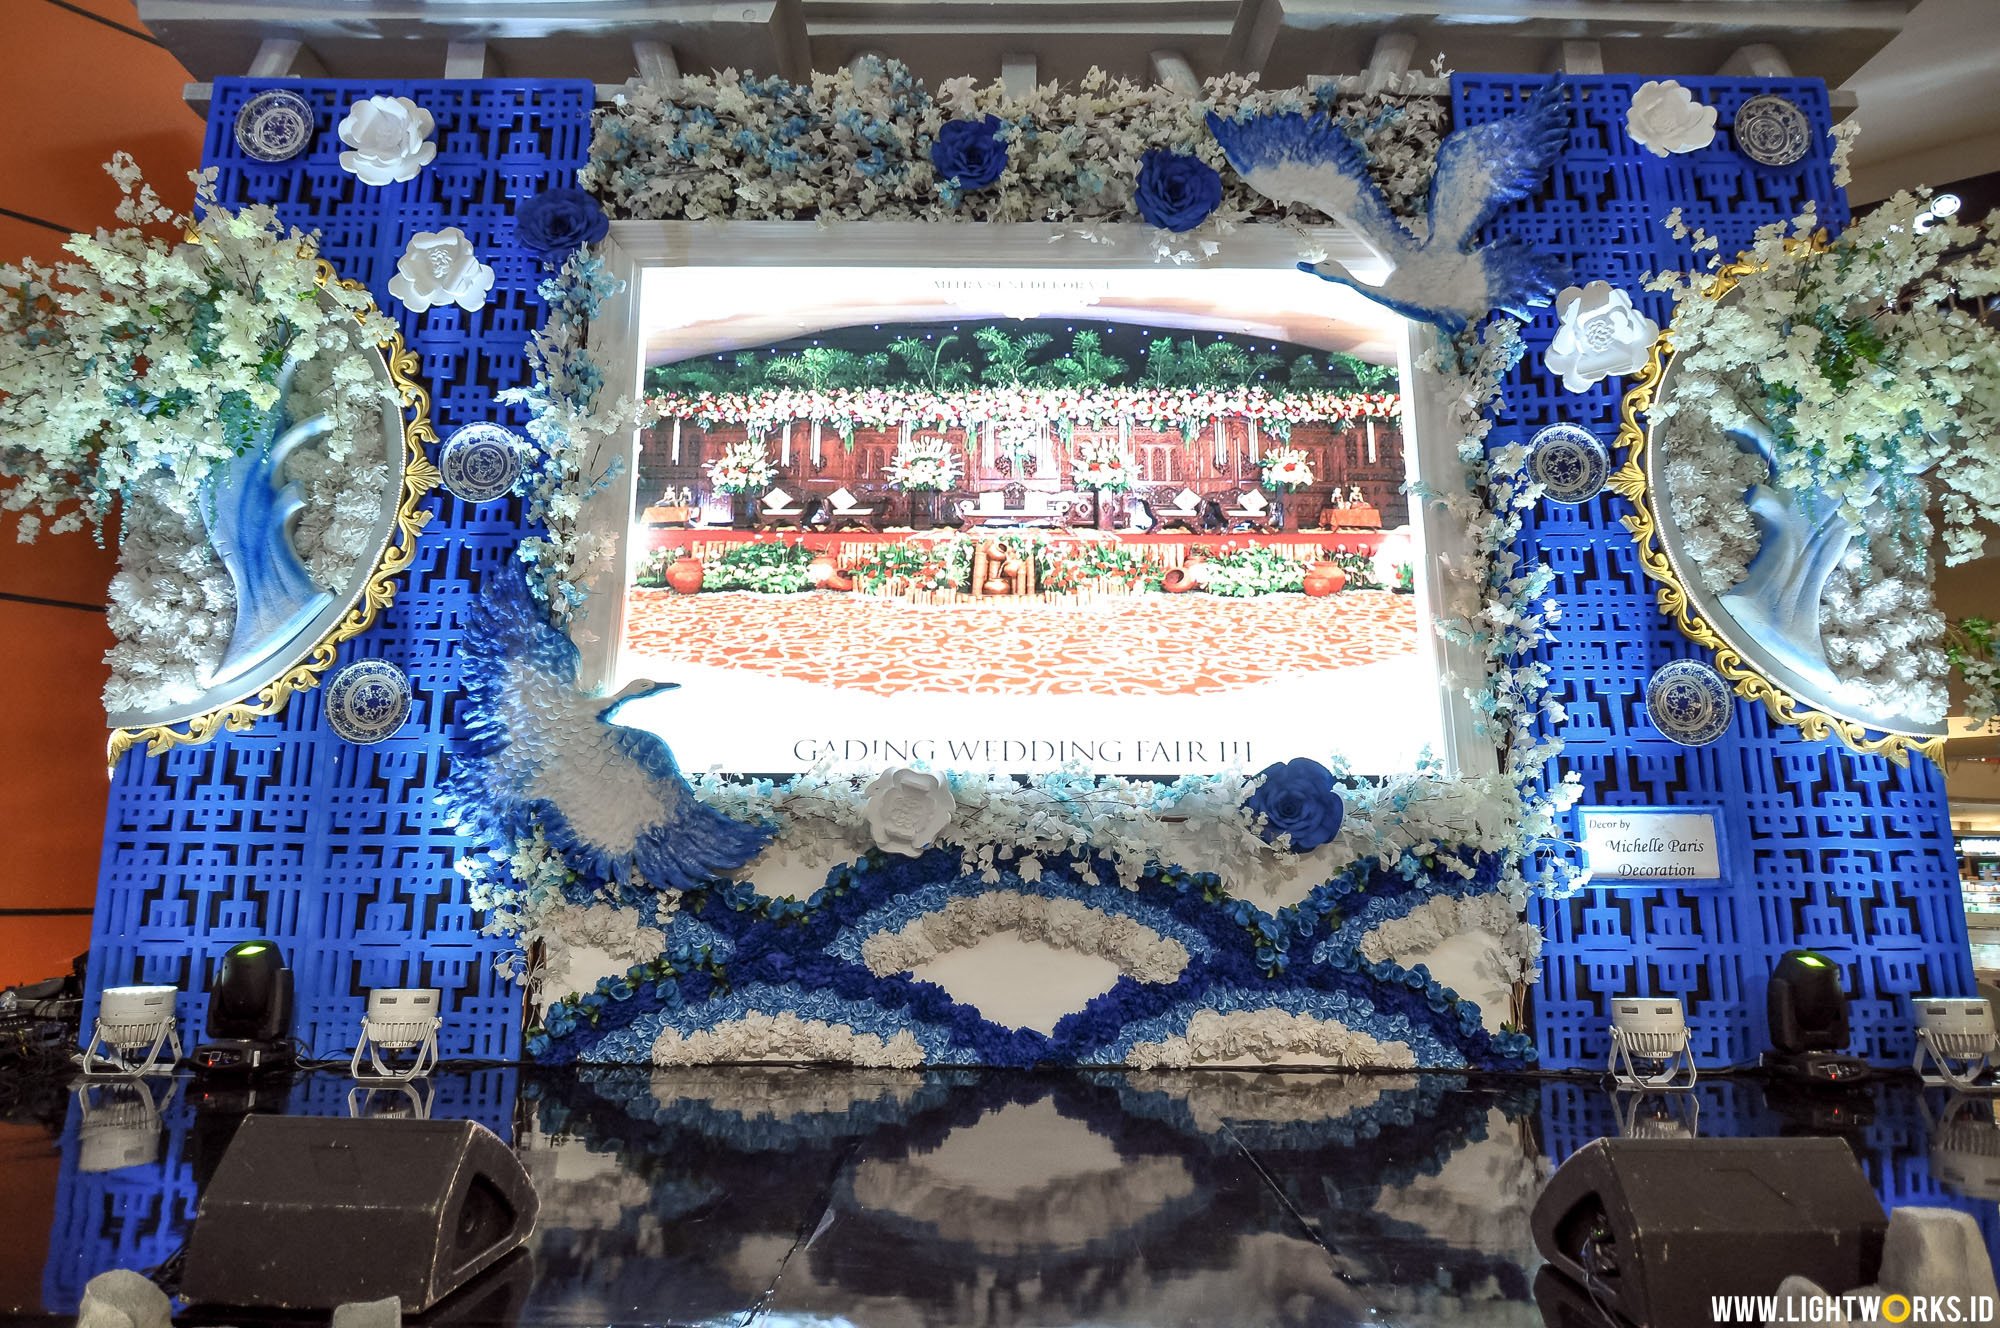 Gading Wedding Fair | Venue at Mall Kelapa Gading | Decoration by Michelle Paris Decoration | Organised by My Princess Entertainment | Lighting by Lightworks